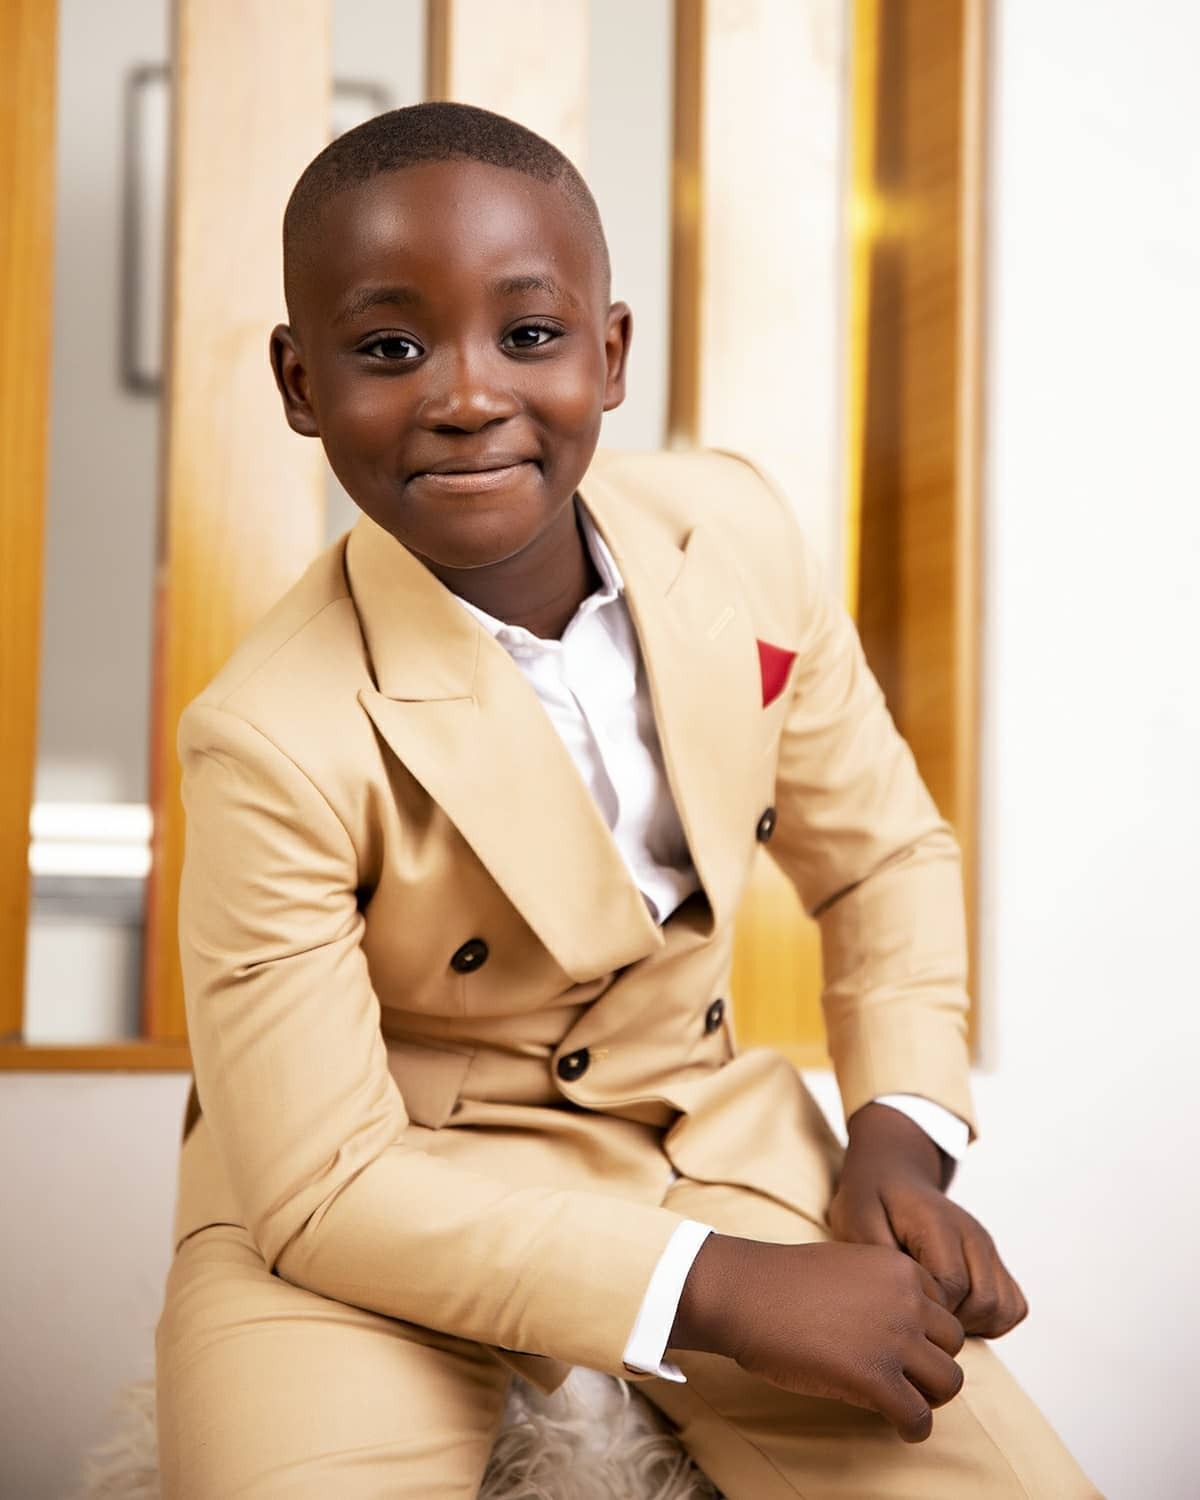 Mercy Johnson and hubby celebrate their son as he turns 7 (photos)